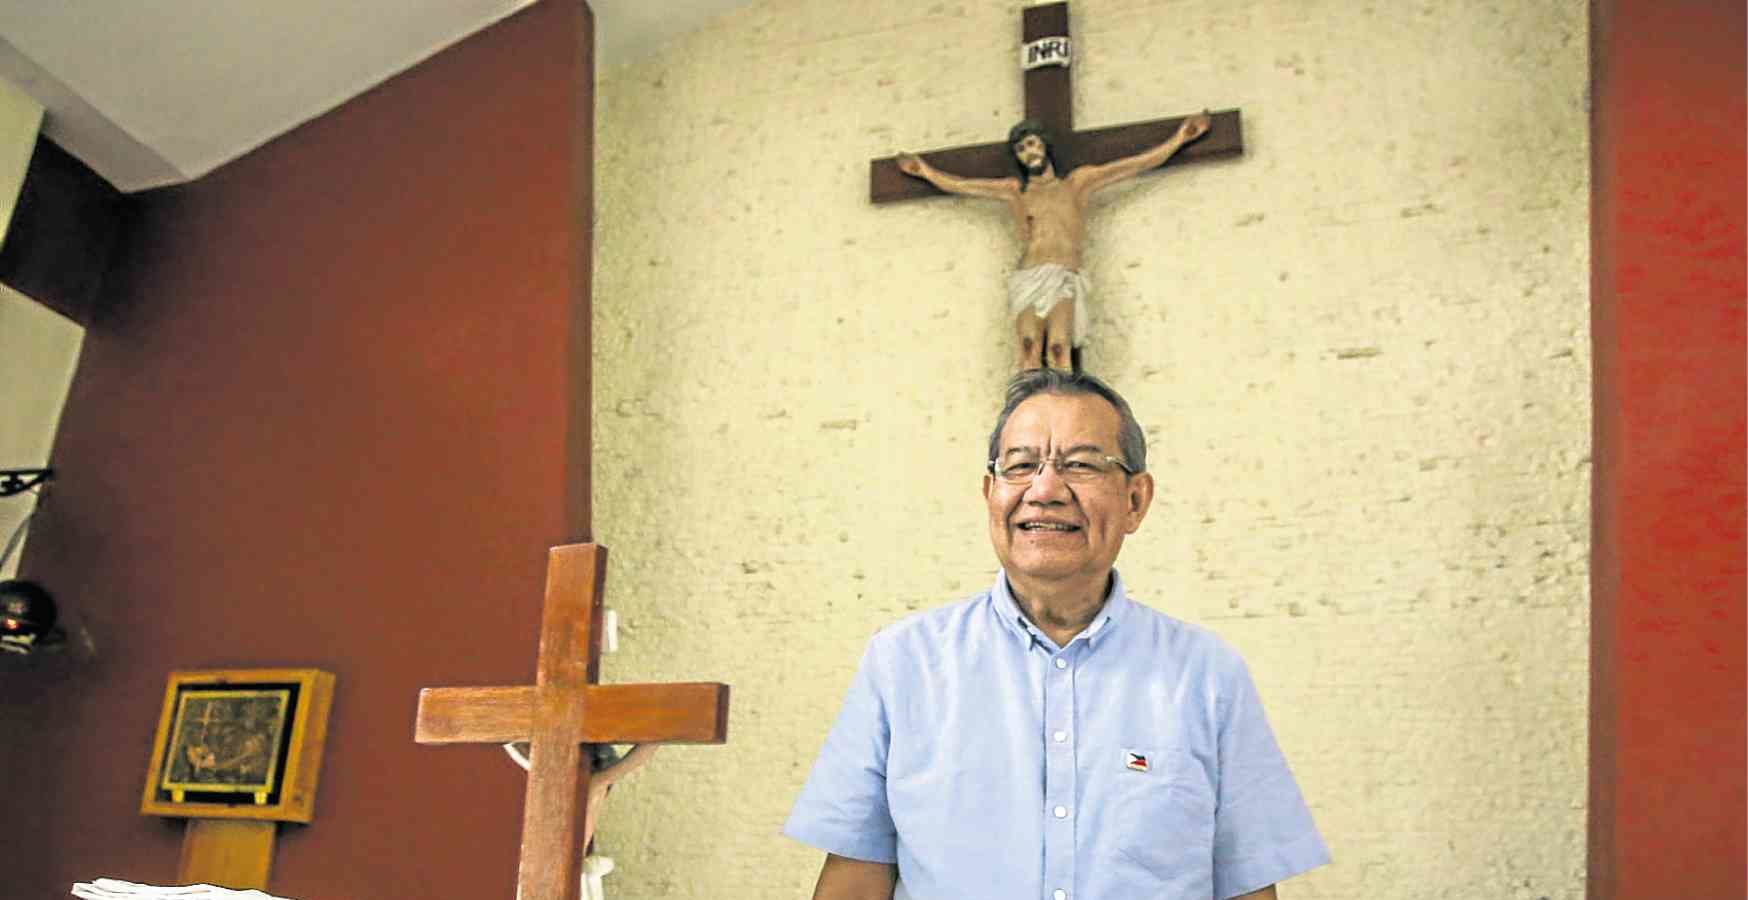 Fr. Jerry Orbos: Focus on the humor, not the tumor